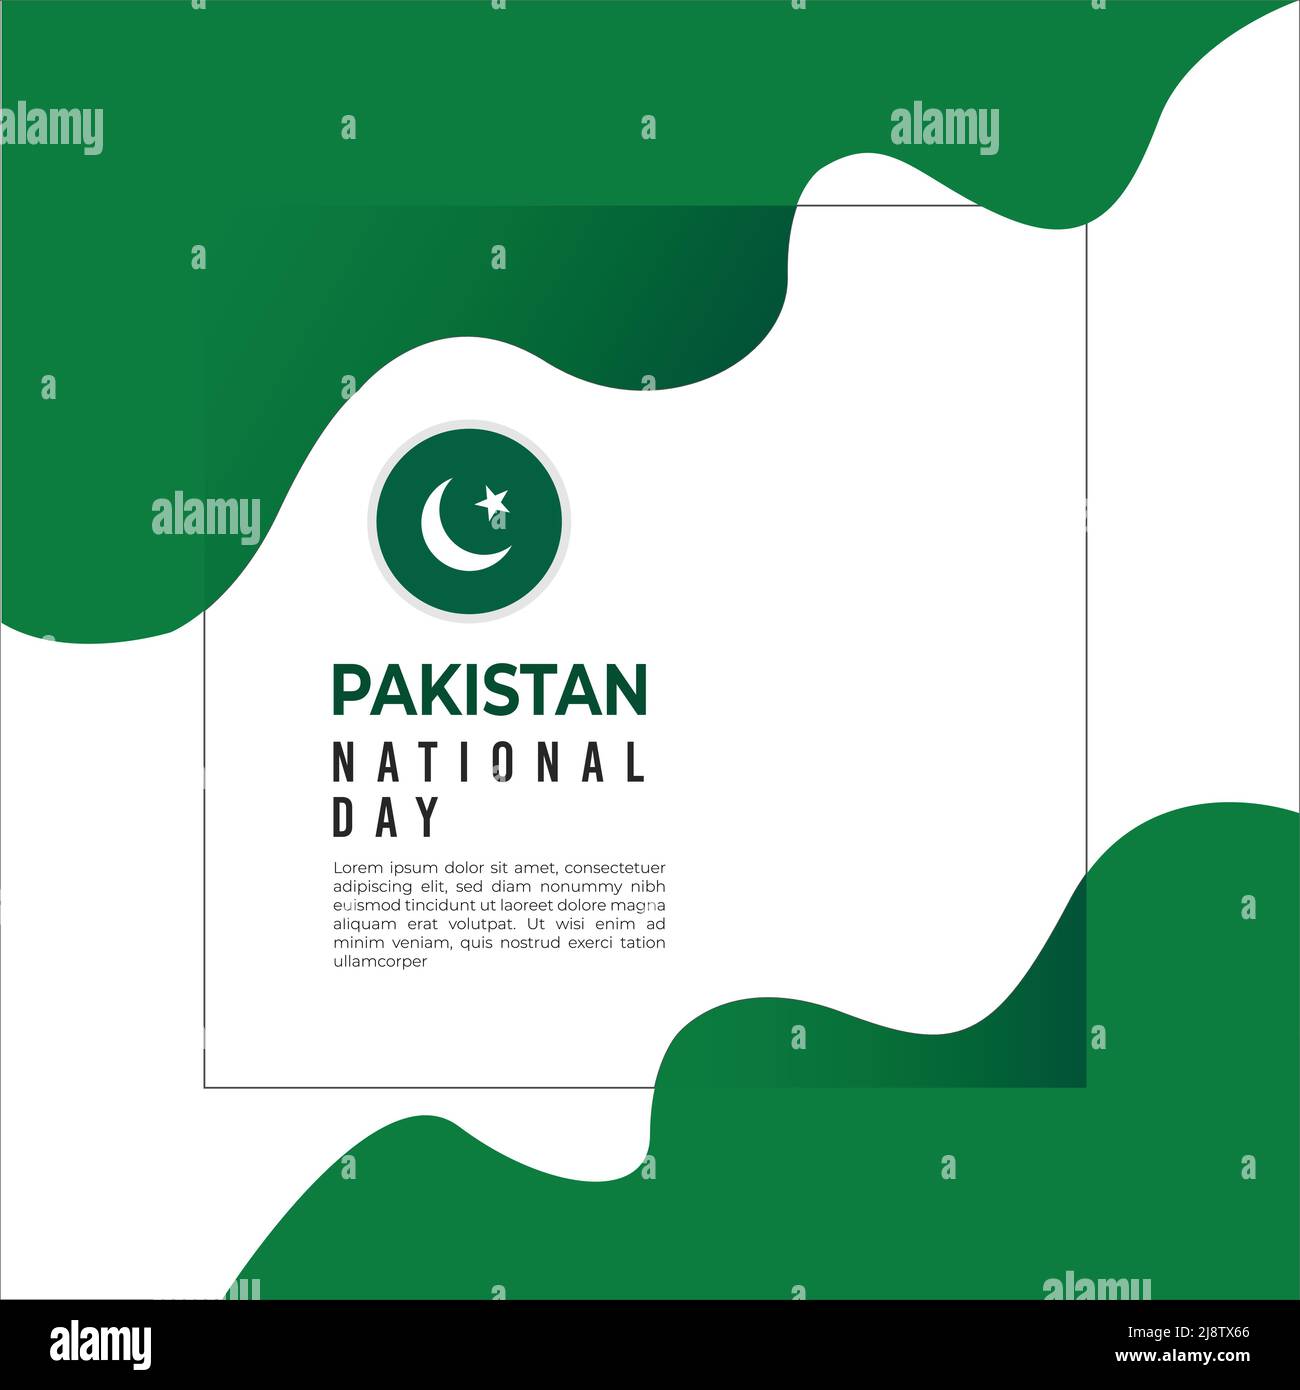 Pakistan National Day Vector Template Design Illustration with water waves frame Stock Vector